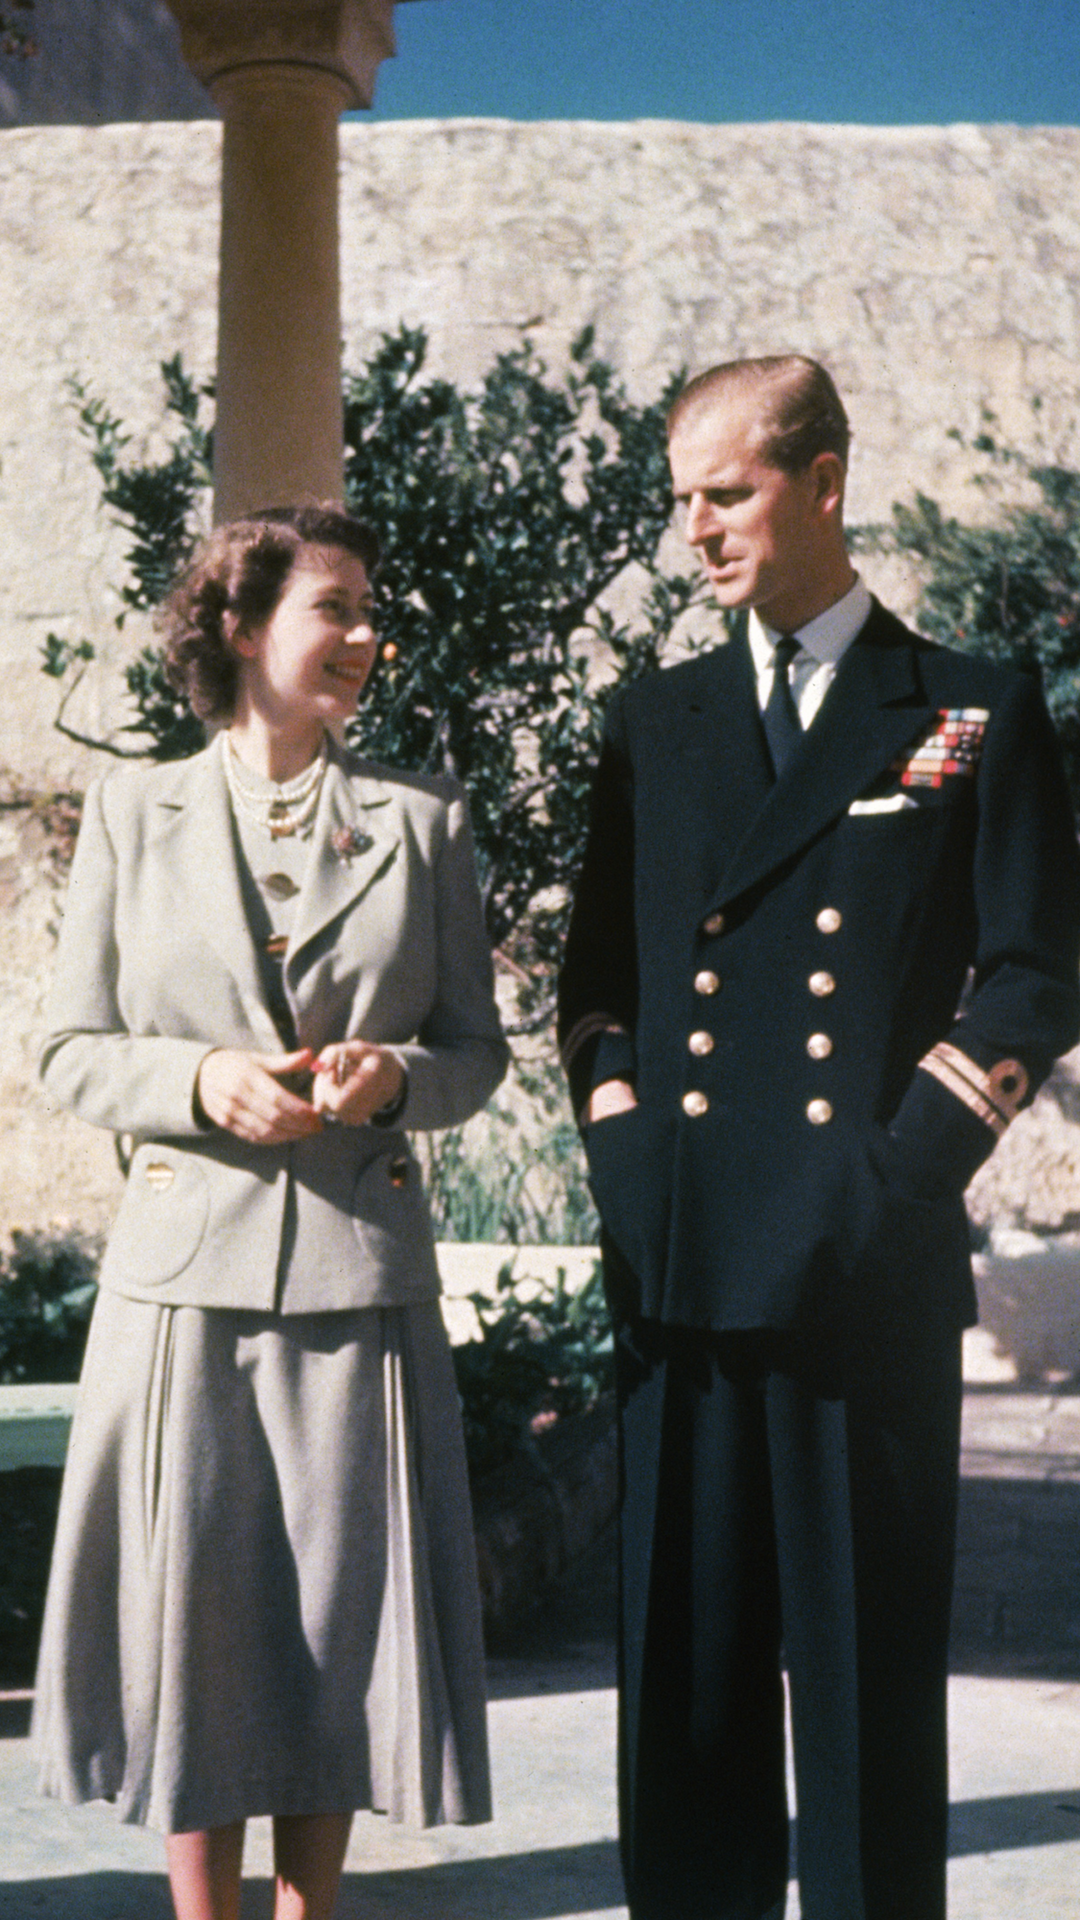 <p>                     The late Queen Elizabeth spent her 1947 honeymoon with Prince Philip in Malta, where he was stationed with the Royal Navy. At the time, the then-Princess Elizabeth and Duke of Edinburgh were living in the Villa Guardamangia on the outskirts of Valetta - and the newlyweds remained at the property until 1951, a year before she acceded the throne.                   </p>